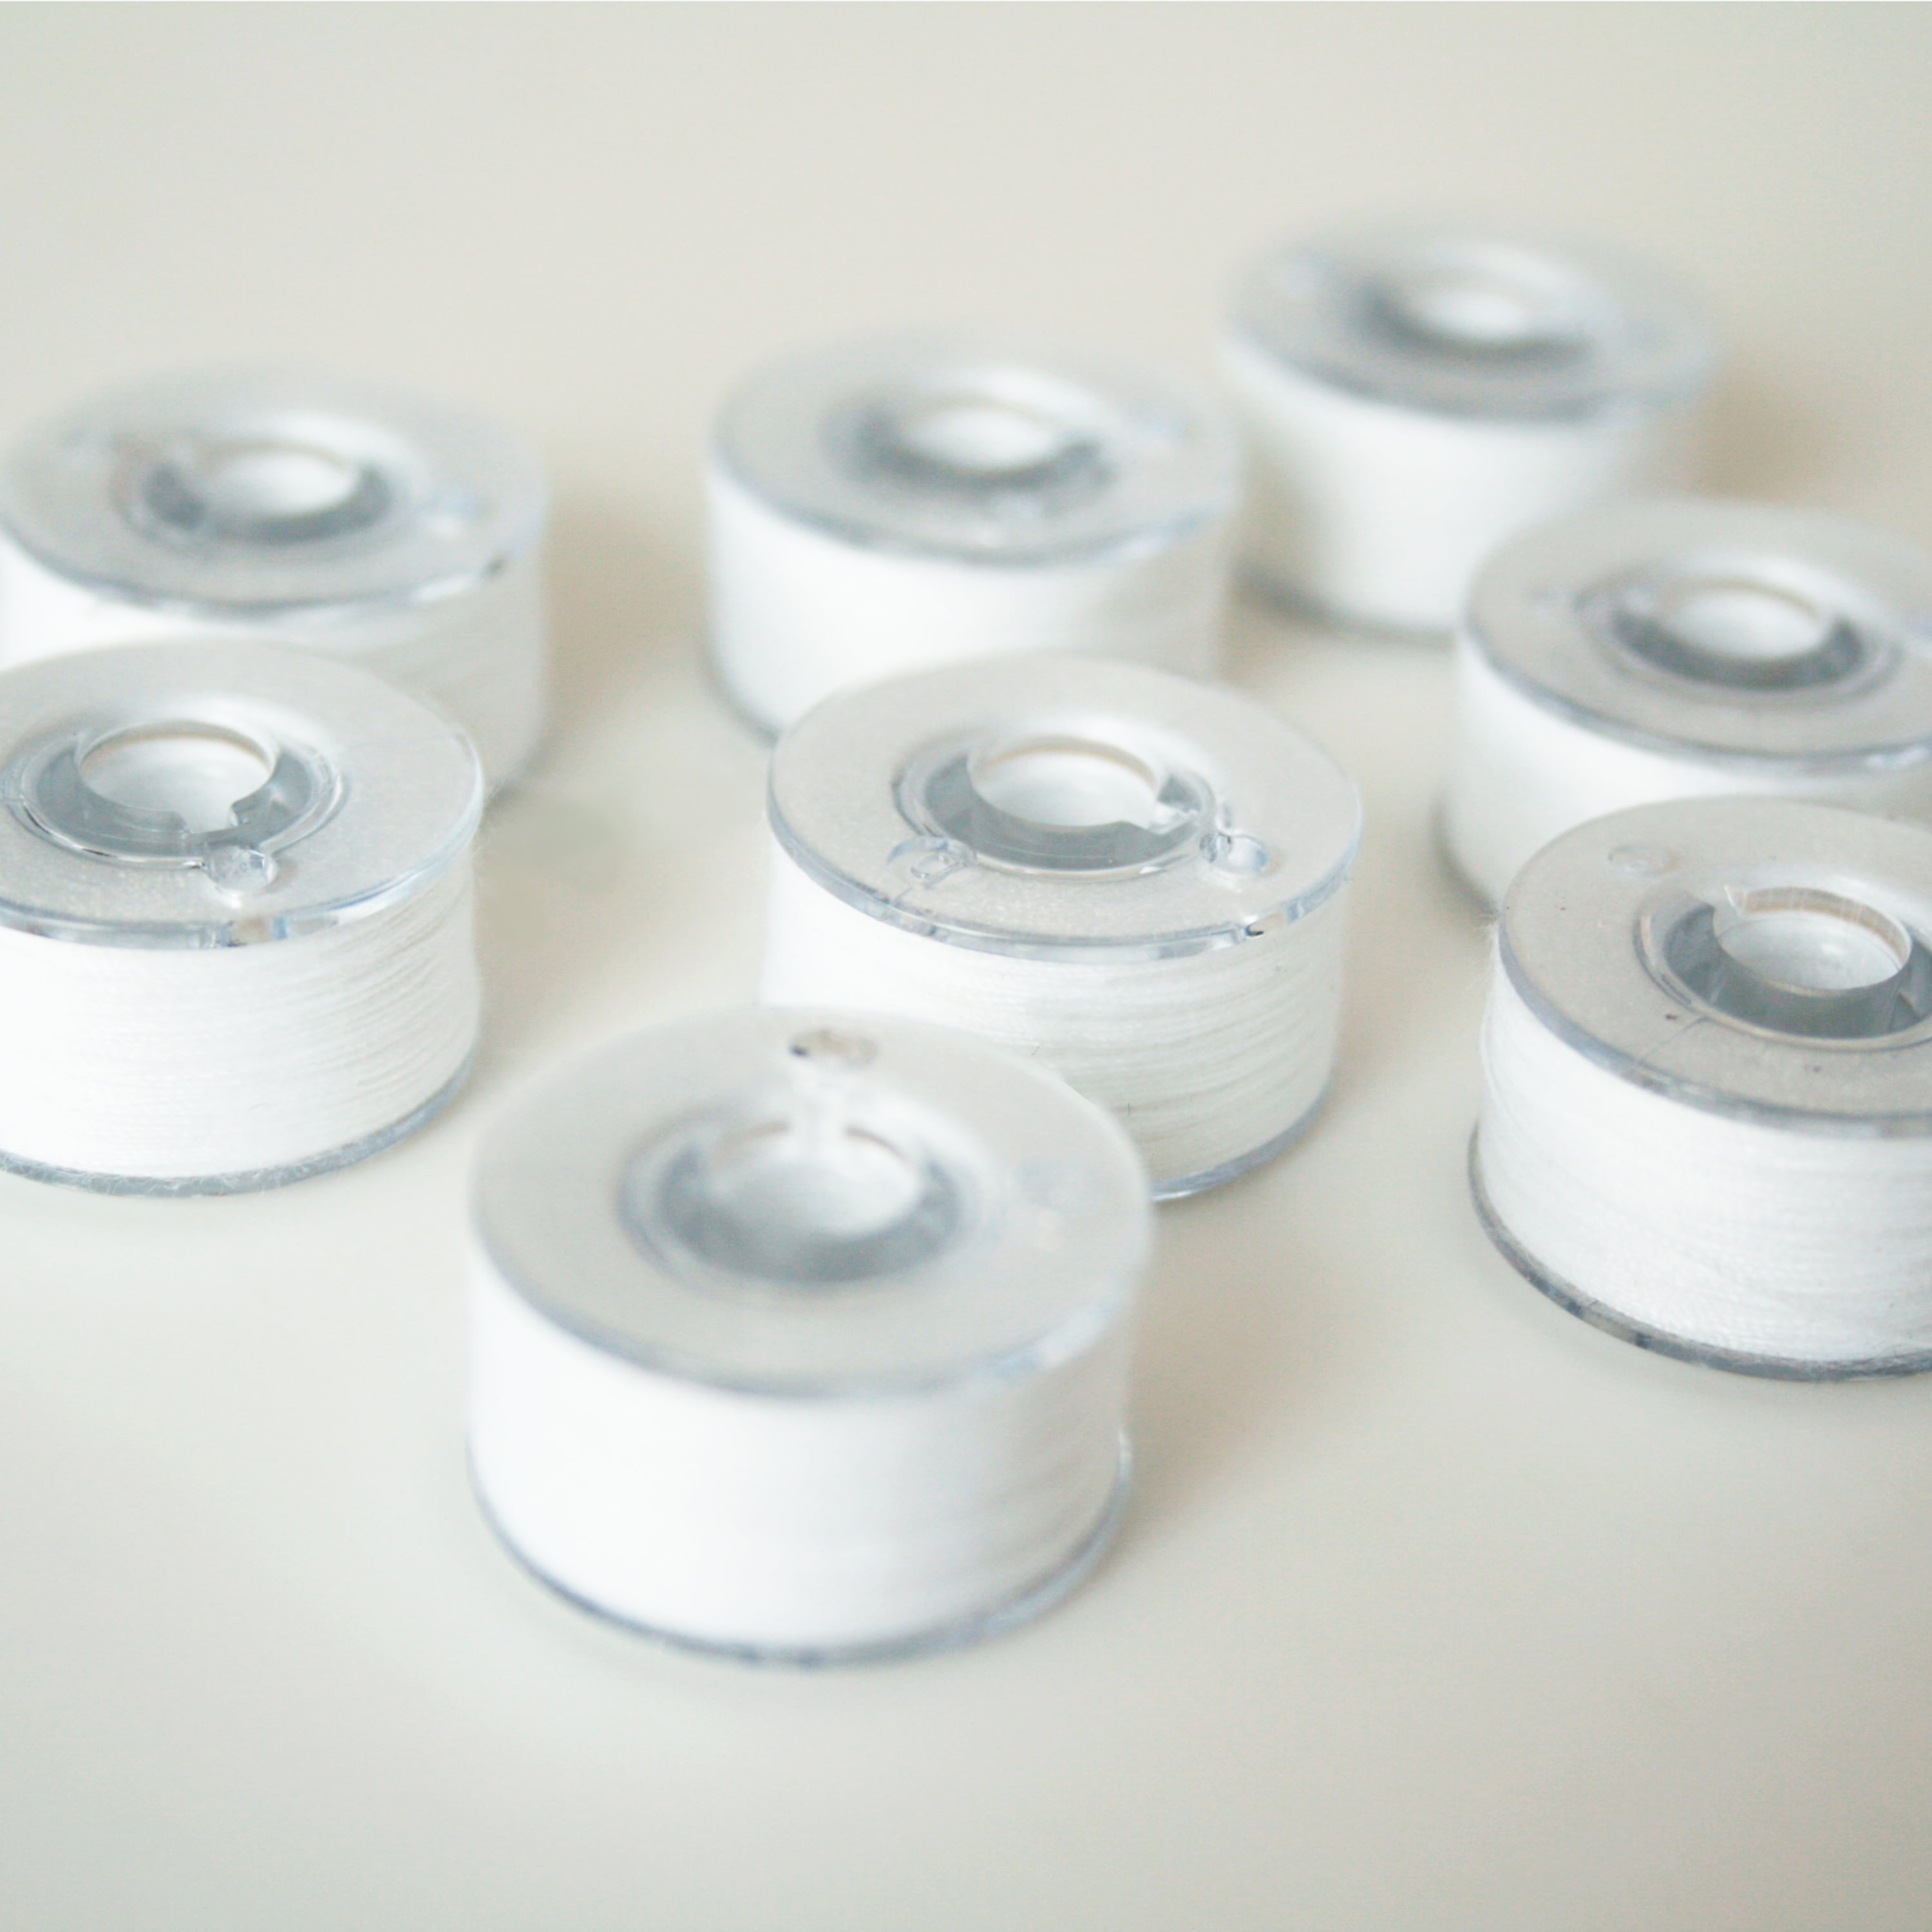 Brother Pre-wound Embroidery Bobbins (11.5 Size) 10 Pack